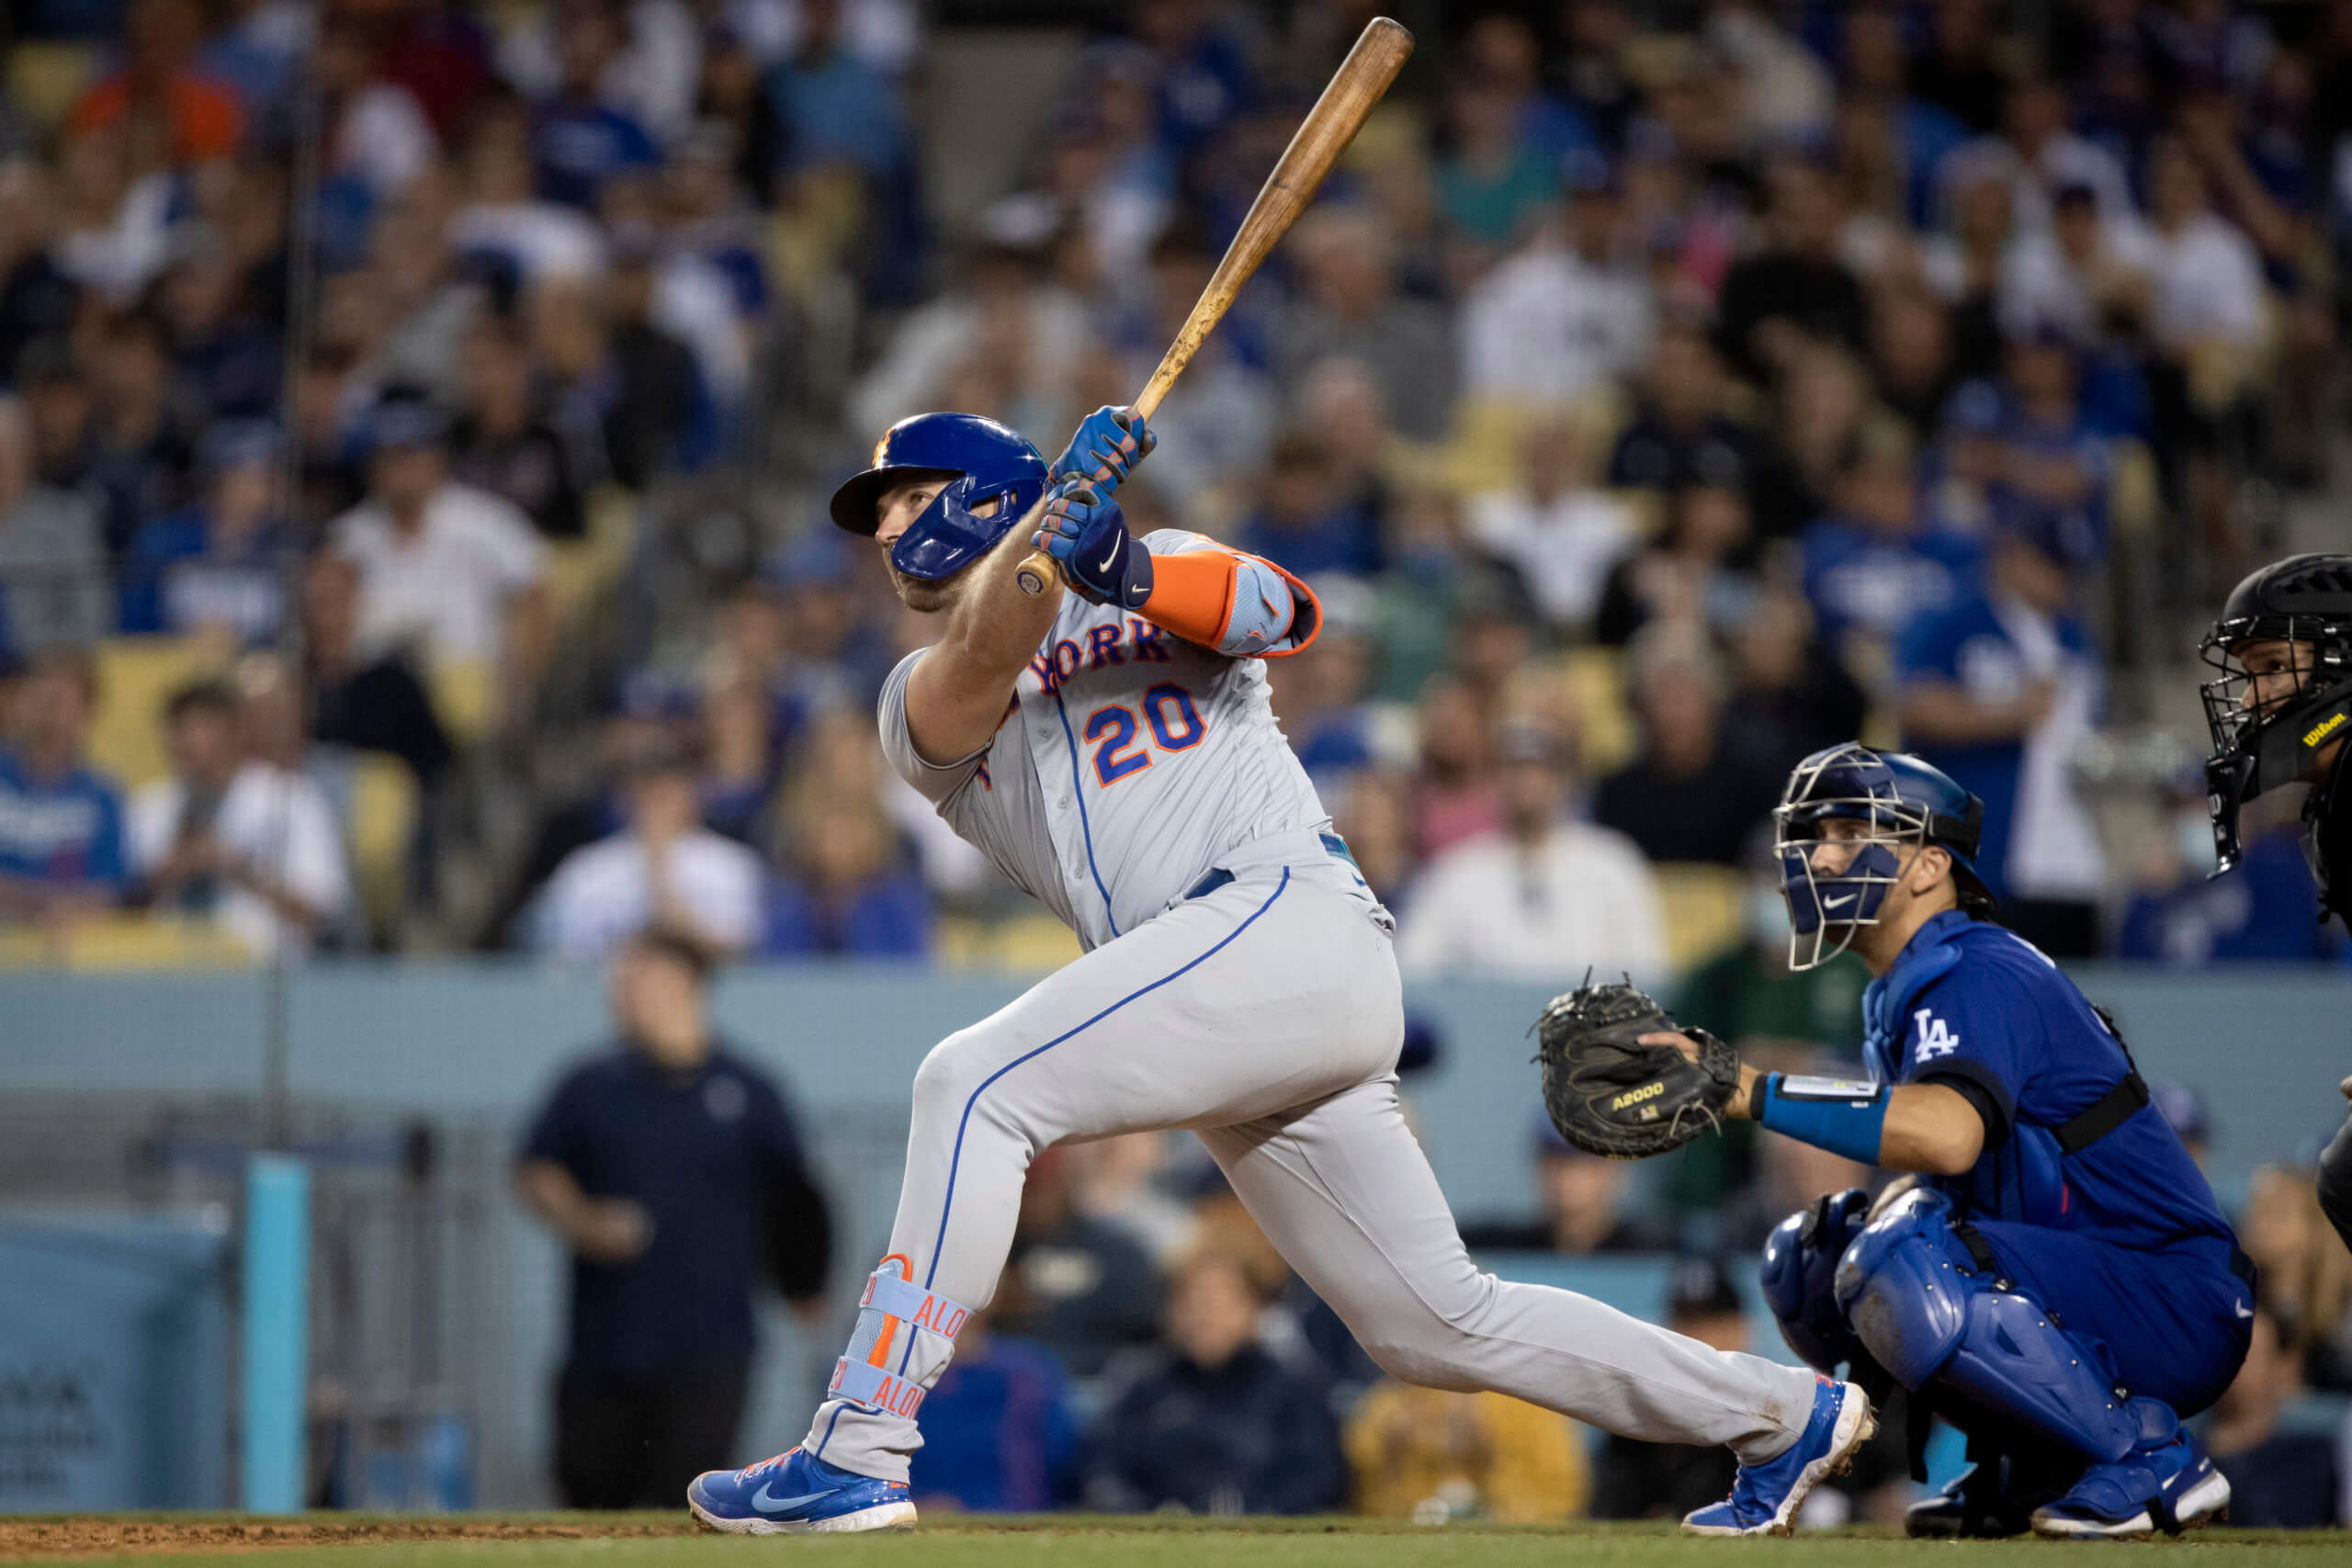 Pete Alonso Home Run Derby history: How the Mets slugger can join